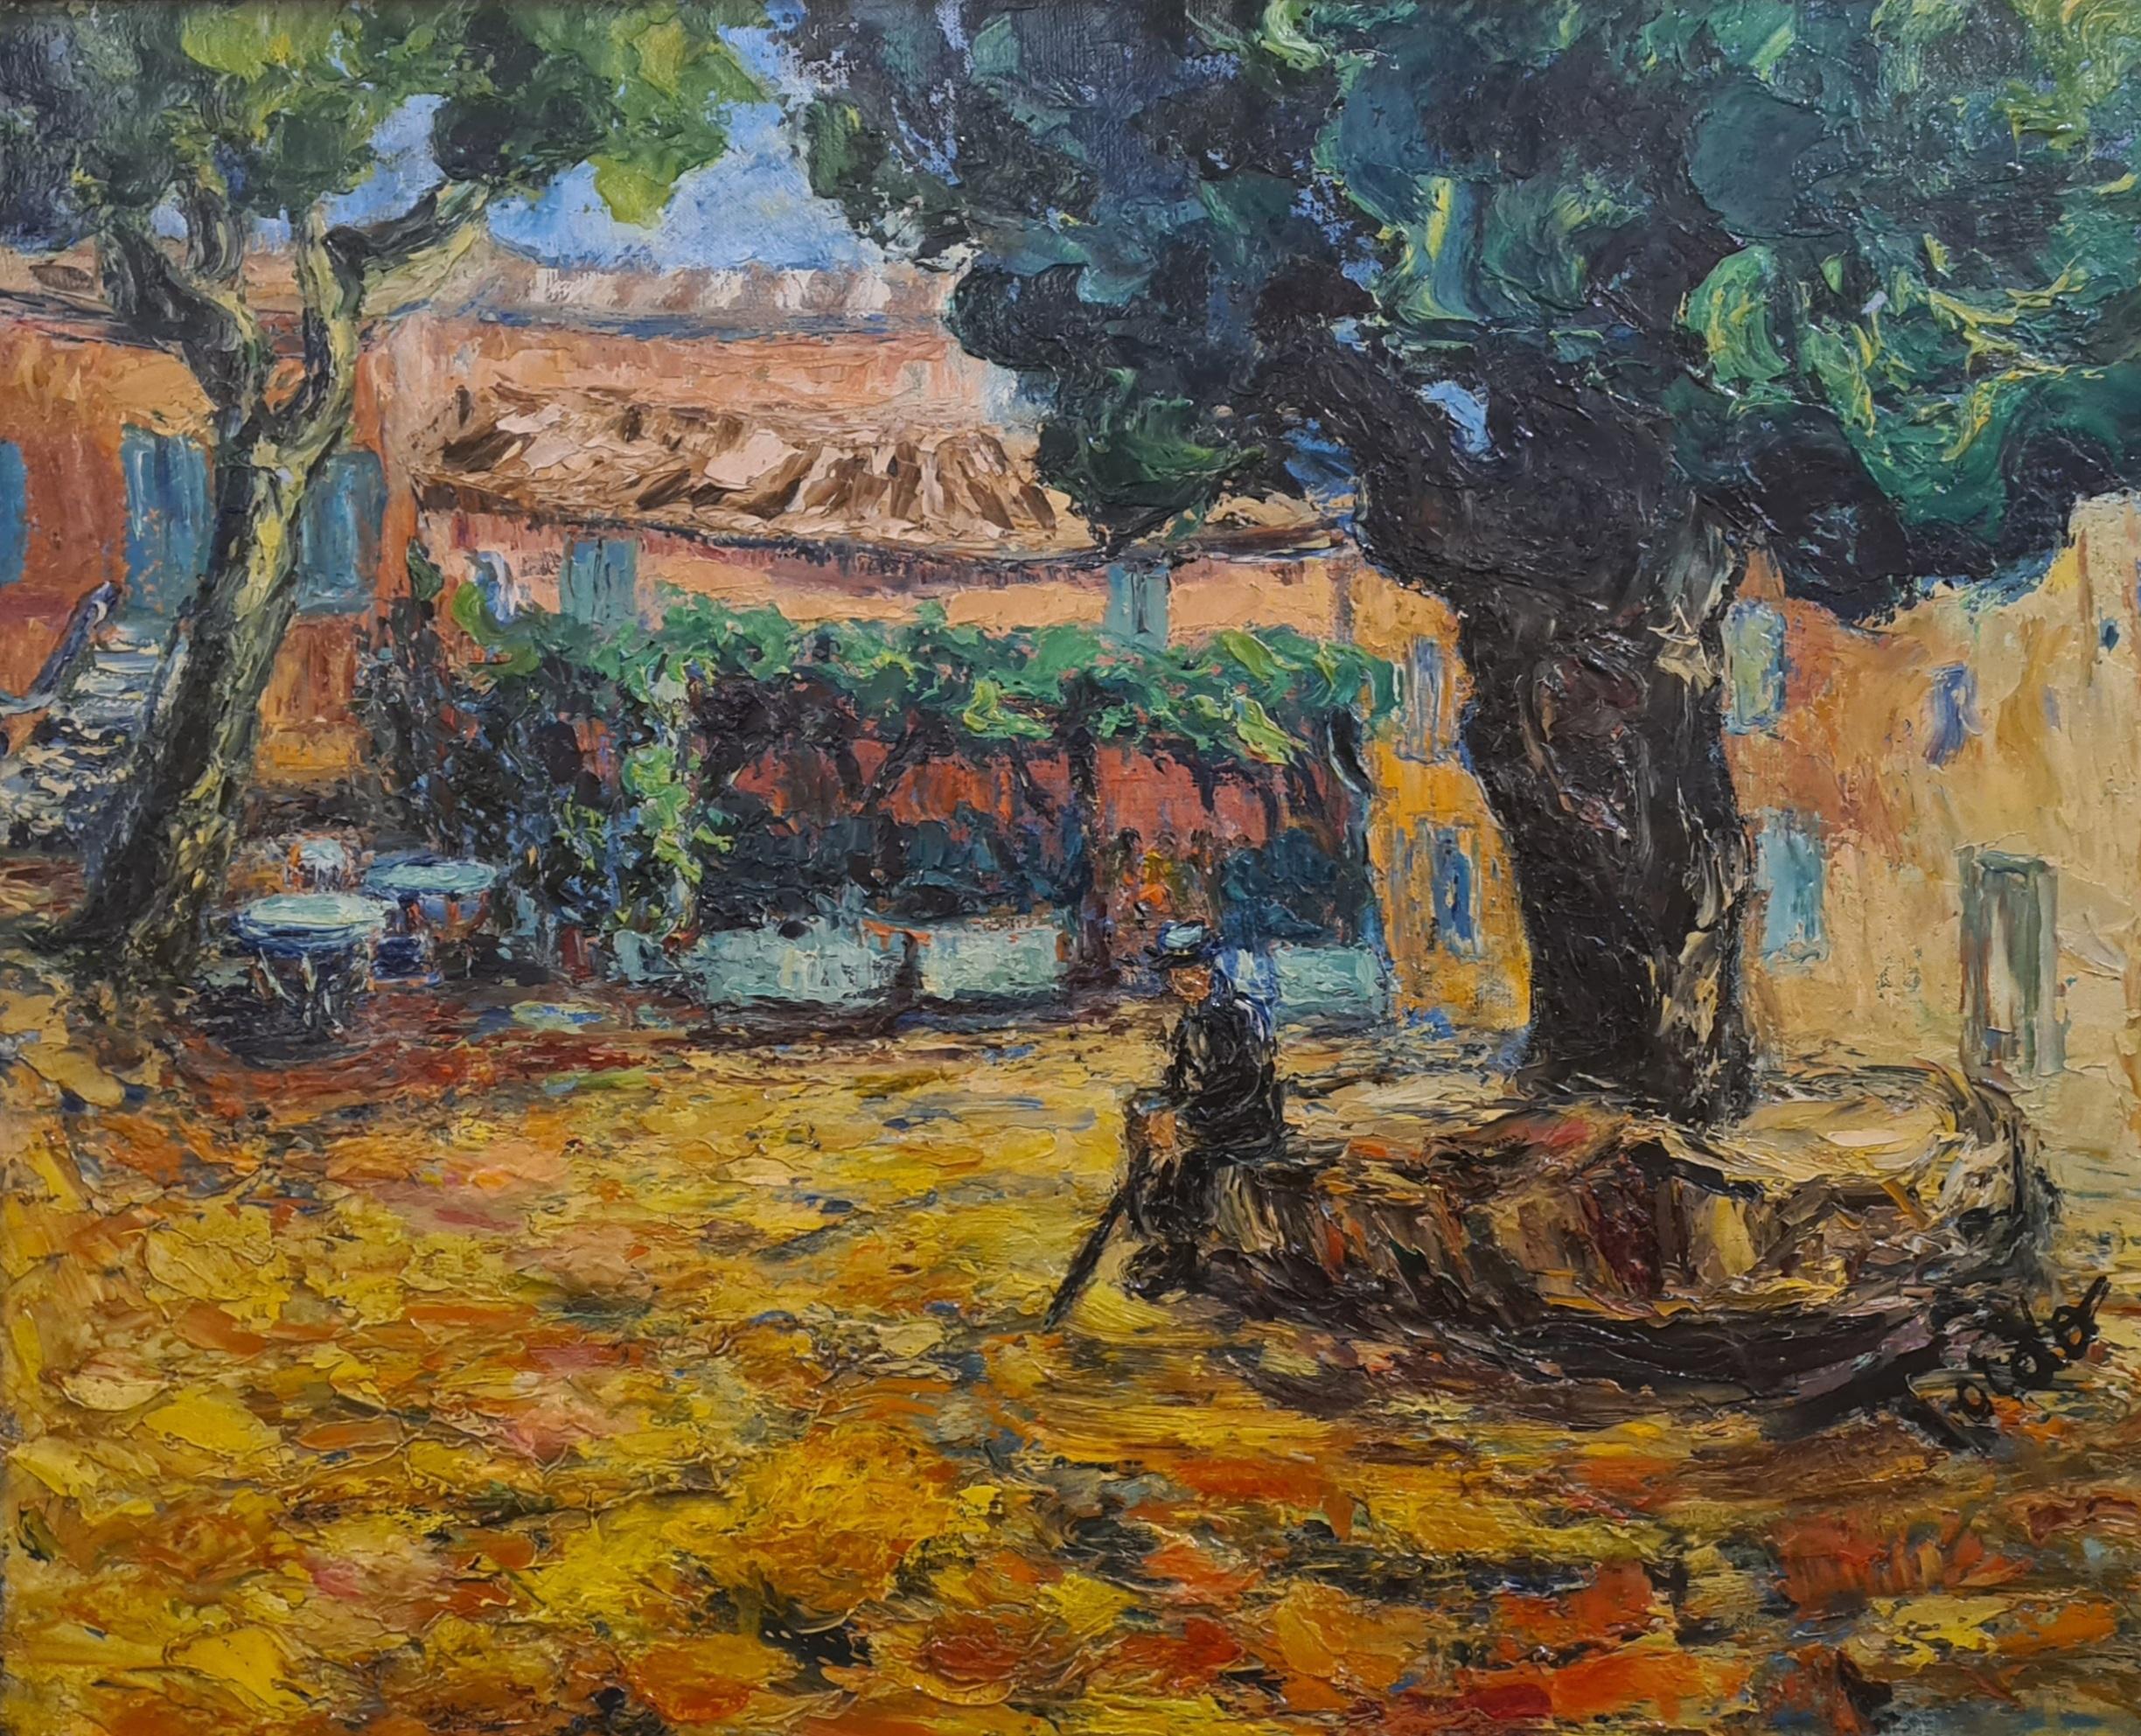 Under the Tree, Ramatuelle, South of France - Painting by Maria Tordo